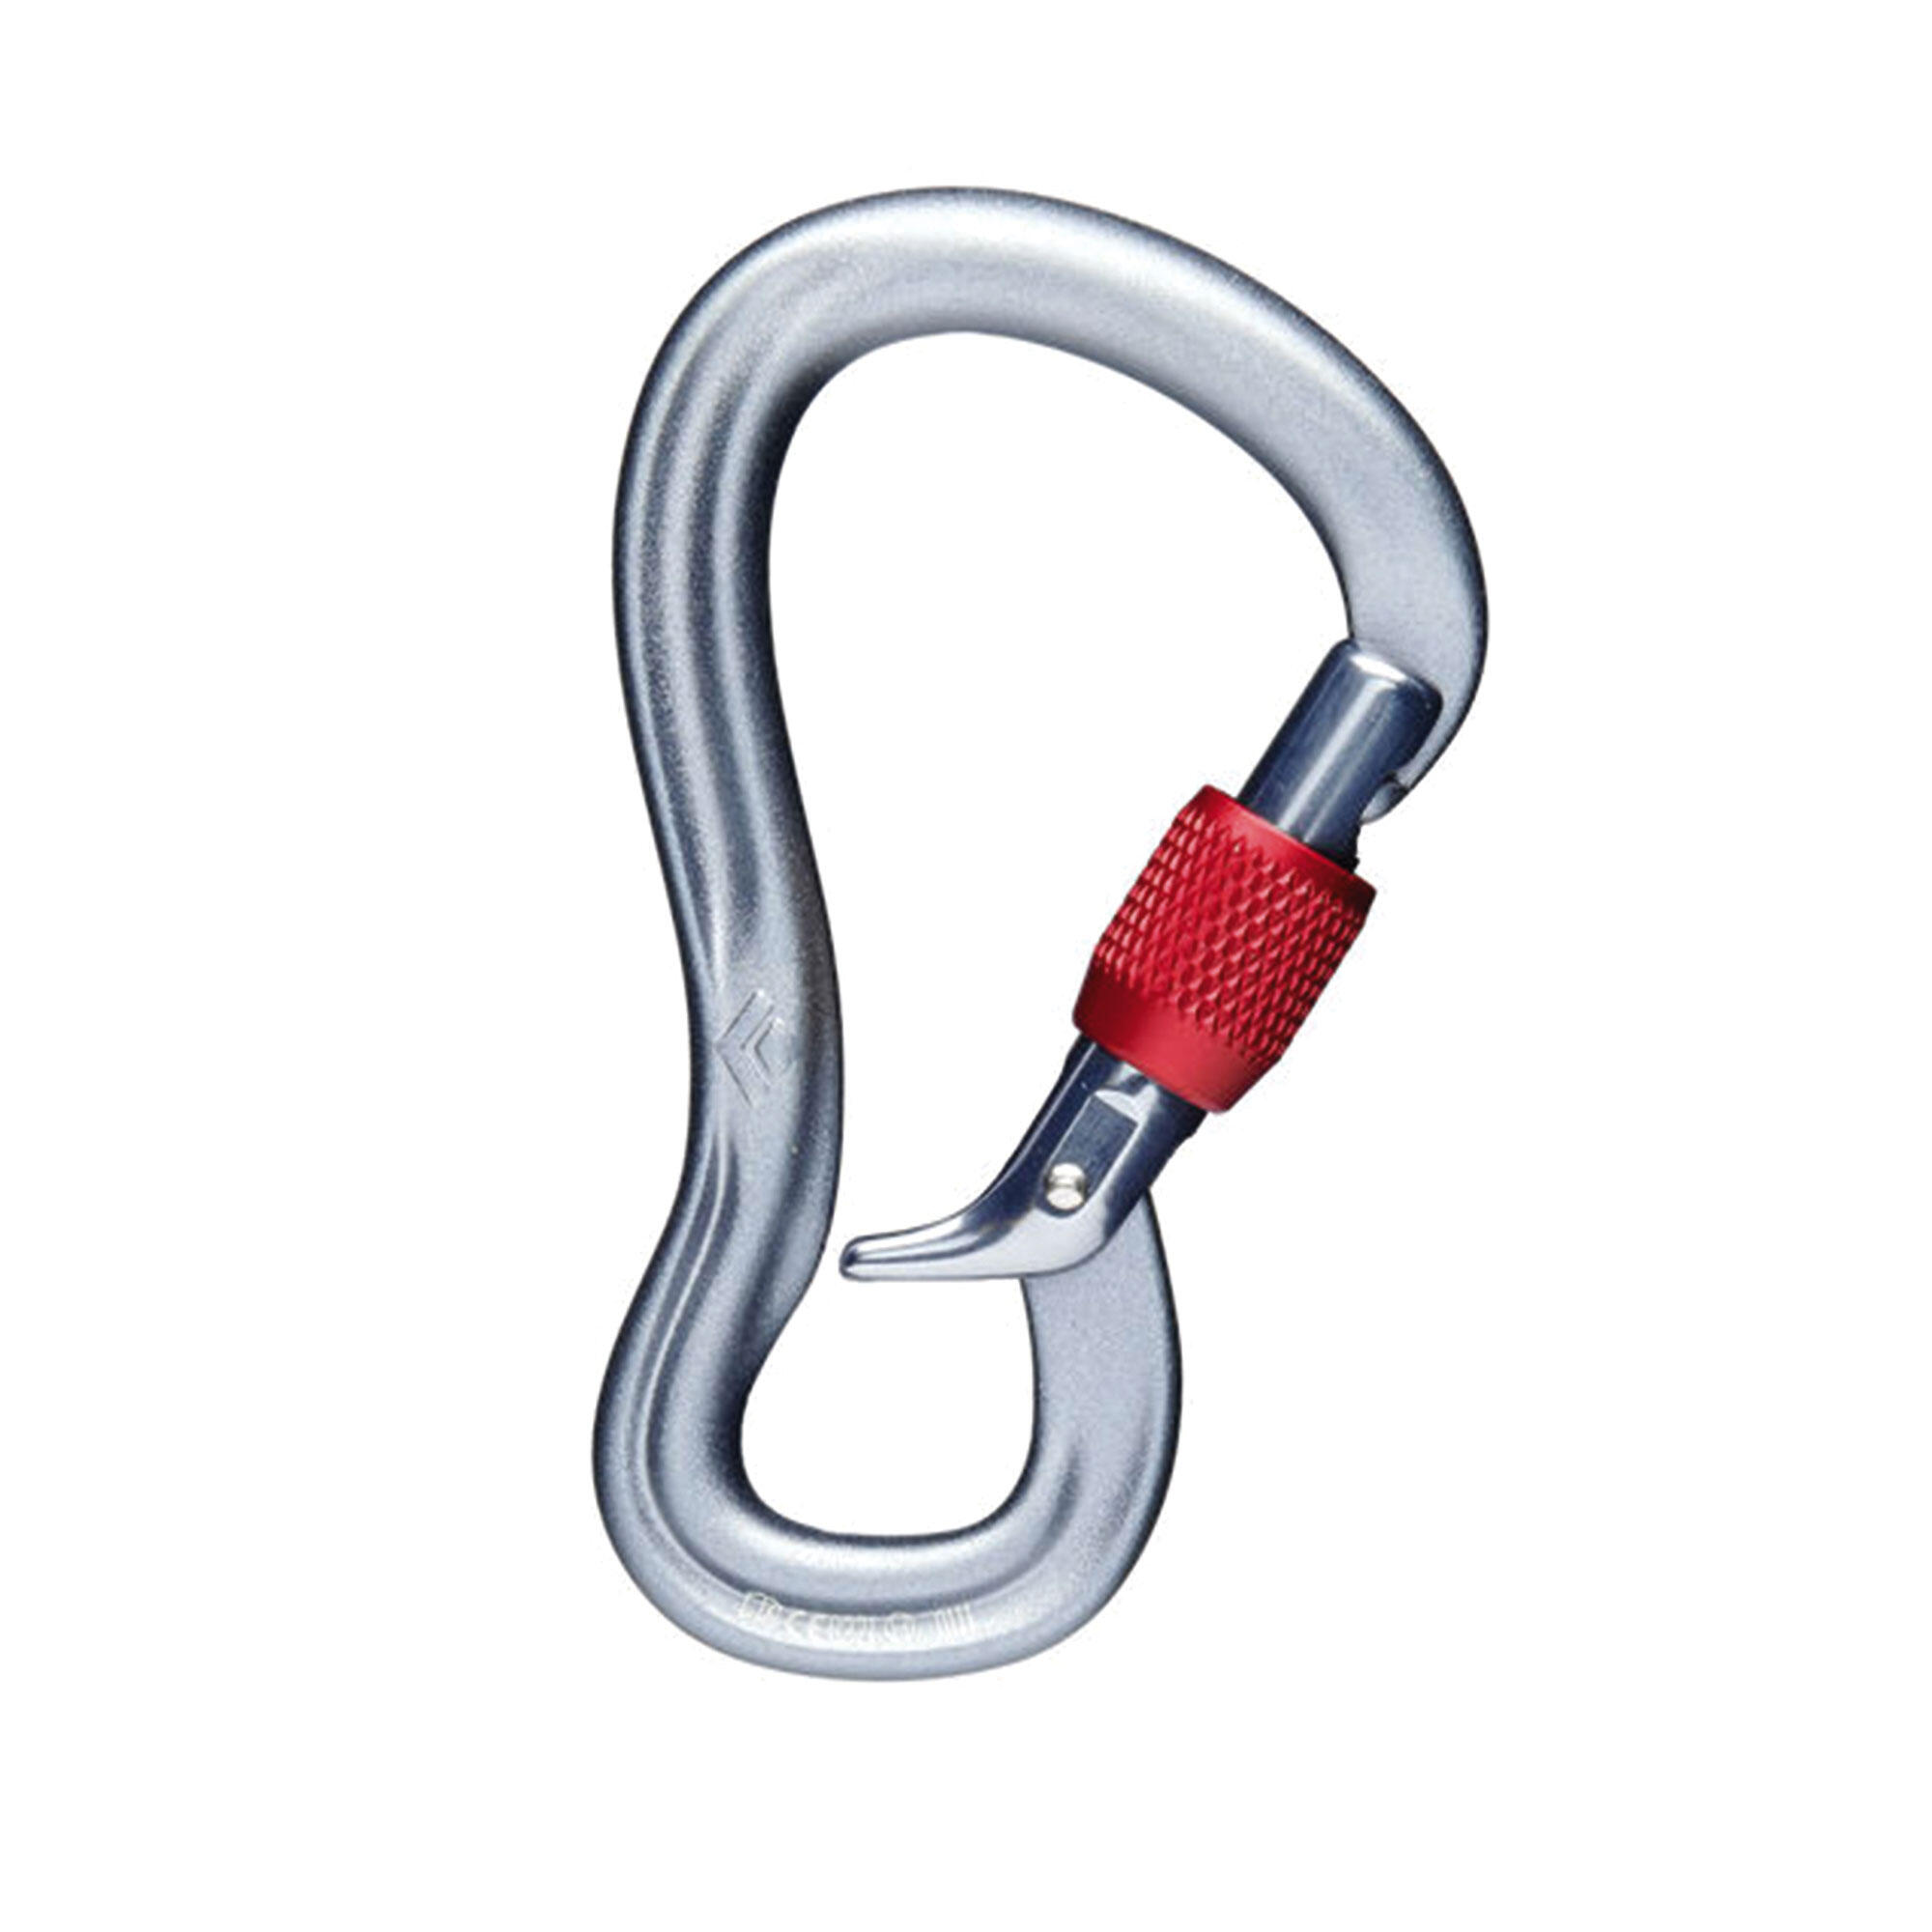 SAFETY CARABINER FOR CLIMBING AND MOUNTAINEERING - GRIDLOCK 1/1